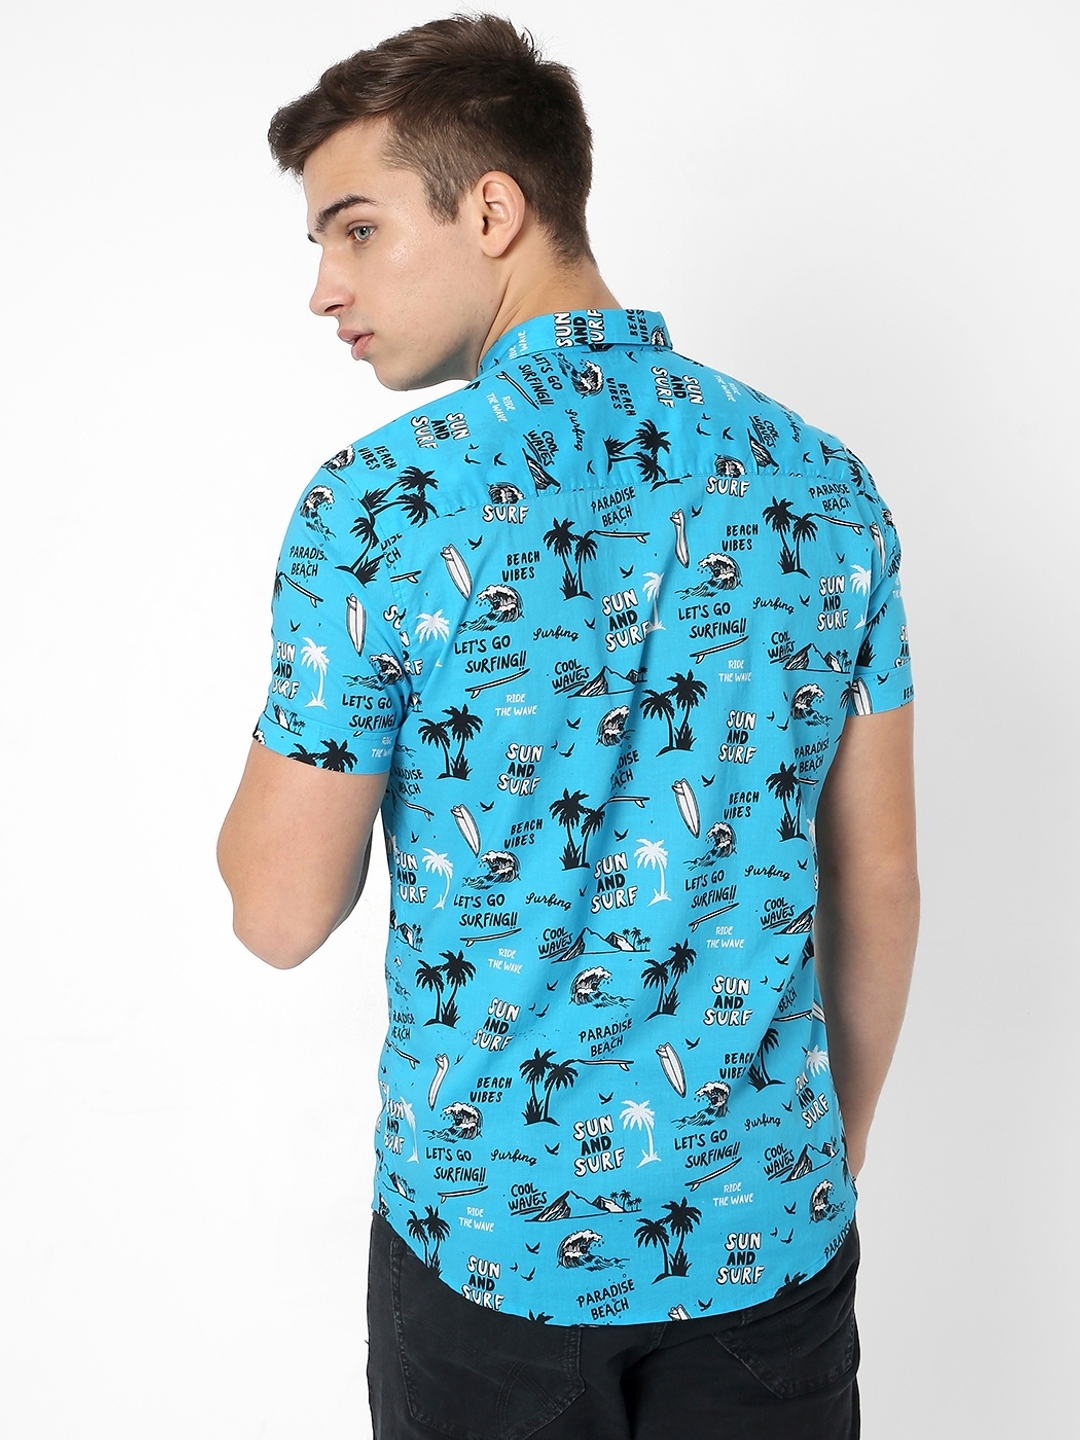 Flix Printed Slim Fit Shirt with Patch Pocket